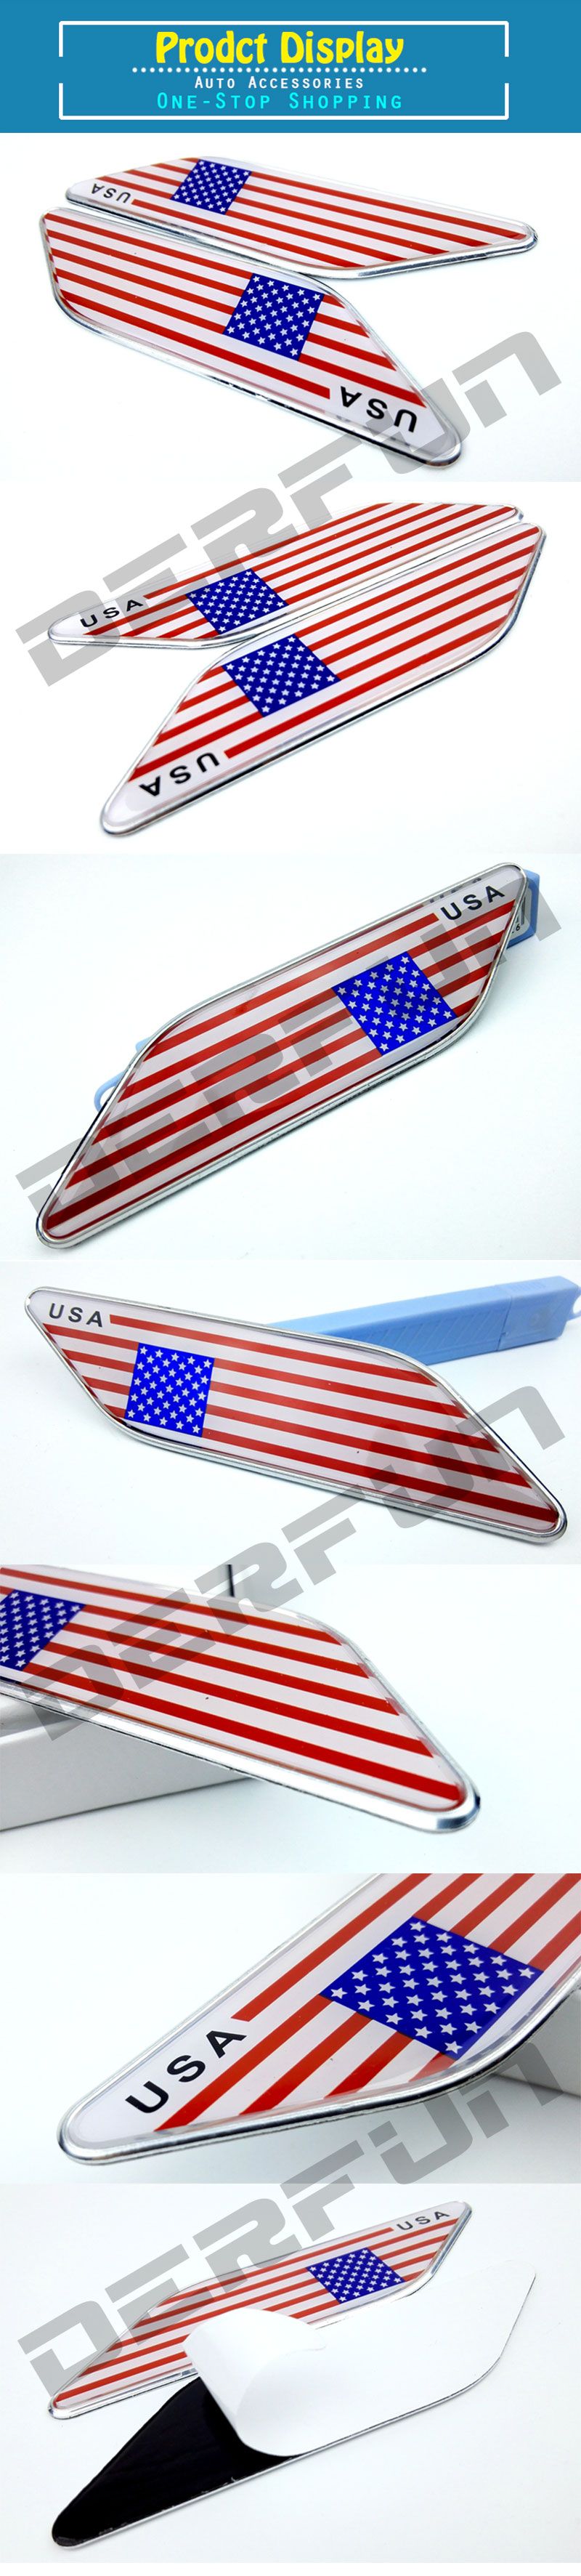 2020 2x United States Usa American Flag For Cadillac Chevrolet Ford Buick Jeep Front Fender Wing Emblem Badge Decals Sticker From Derfun Car 9 75 Dhgate Com - us flag decal roblox